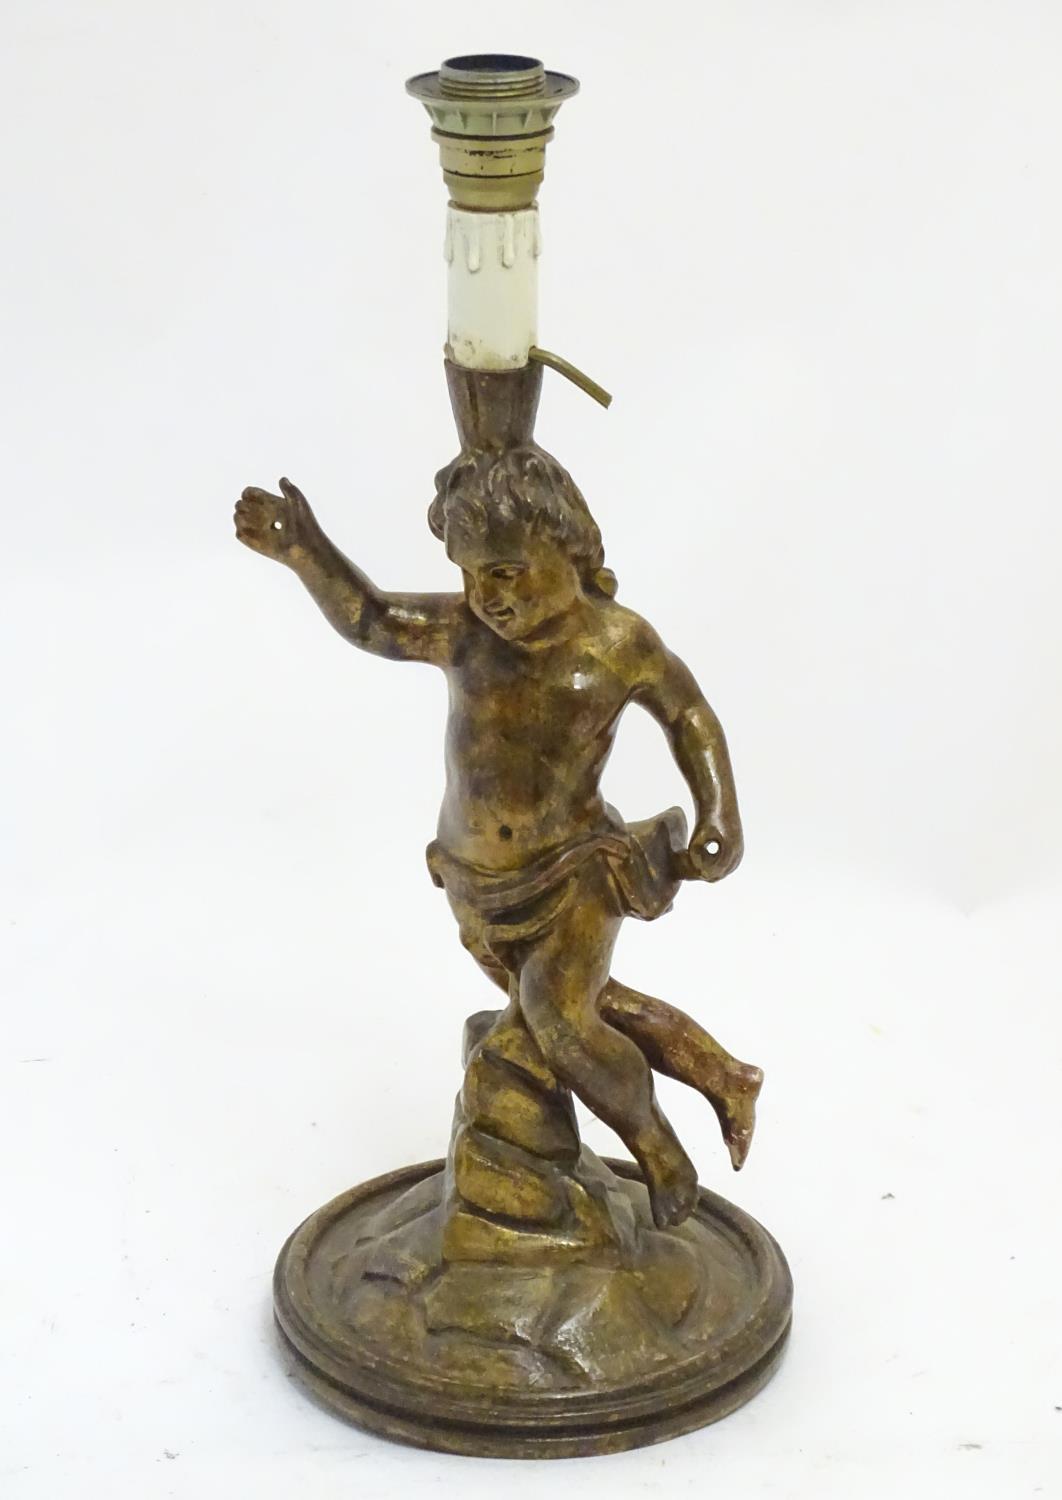 A 20thC Italian carved wooden lamp, formed as a putto with gilt finish and circular base, 21 1/4"